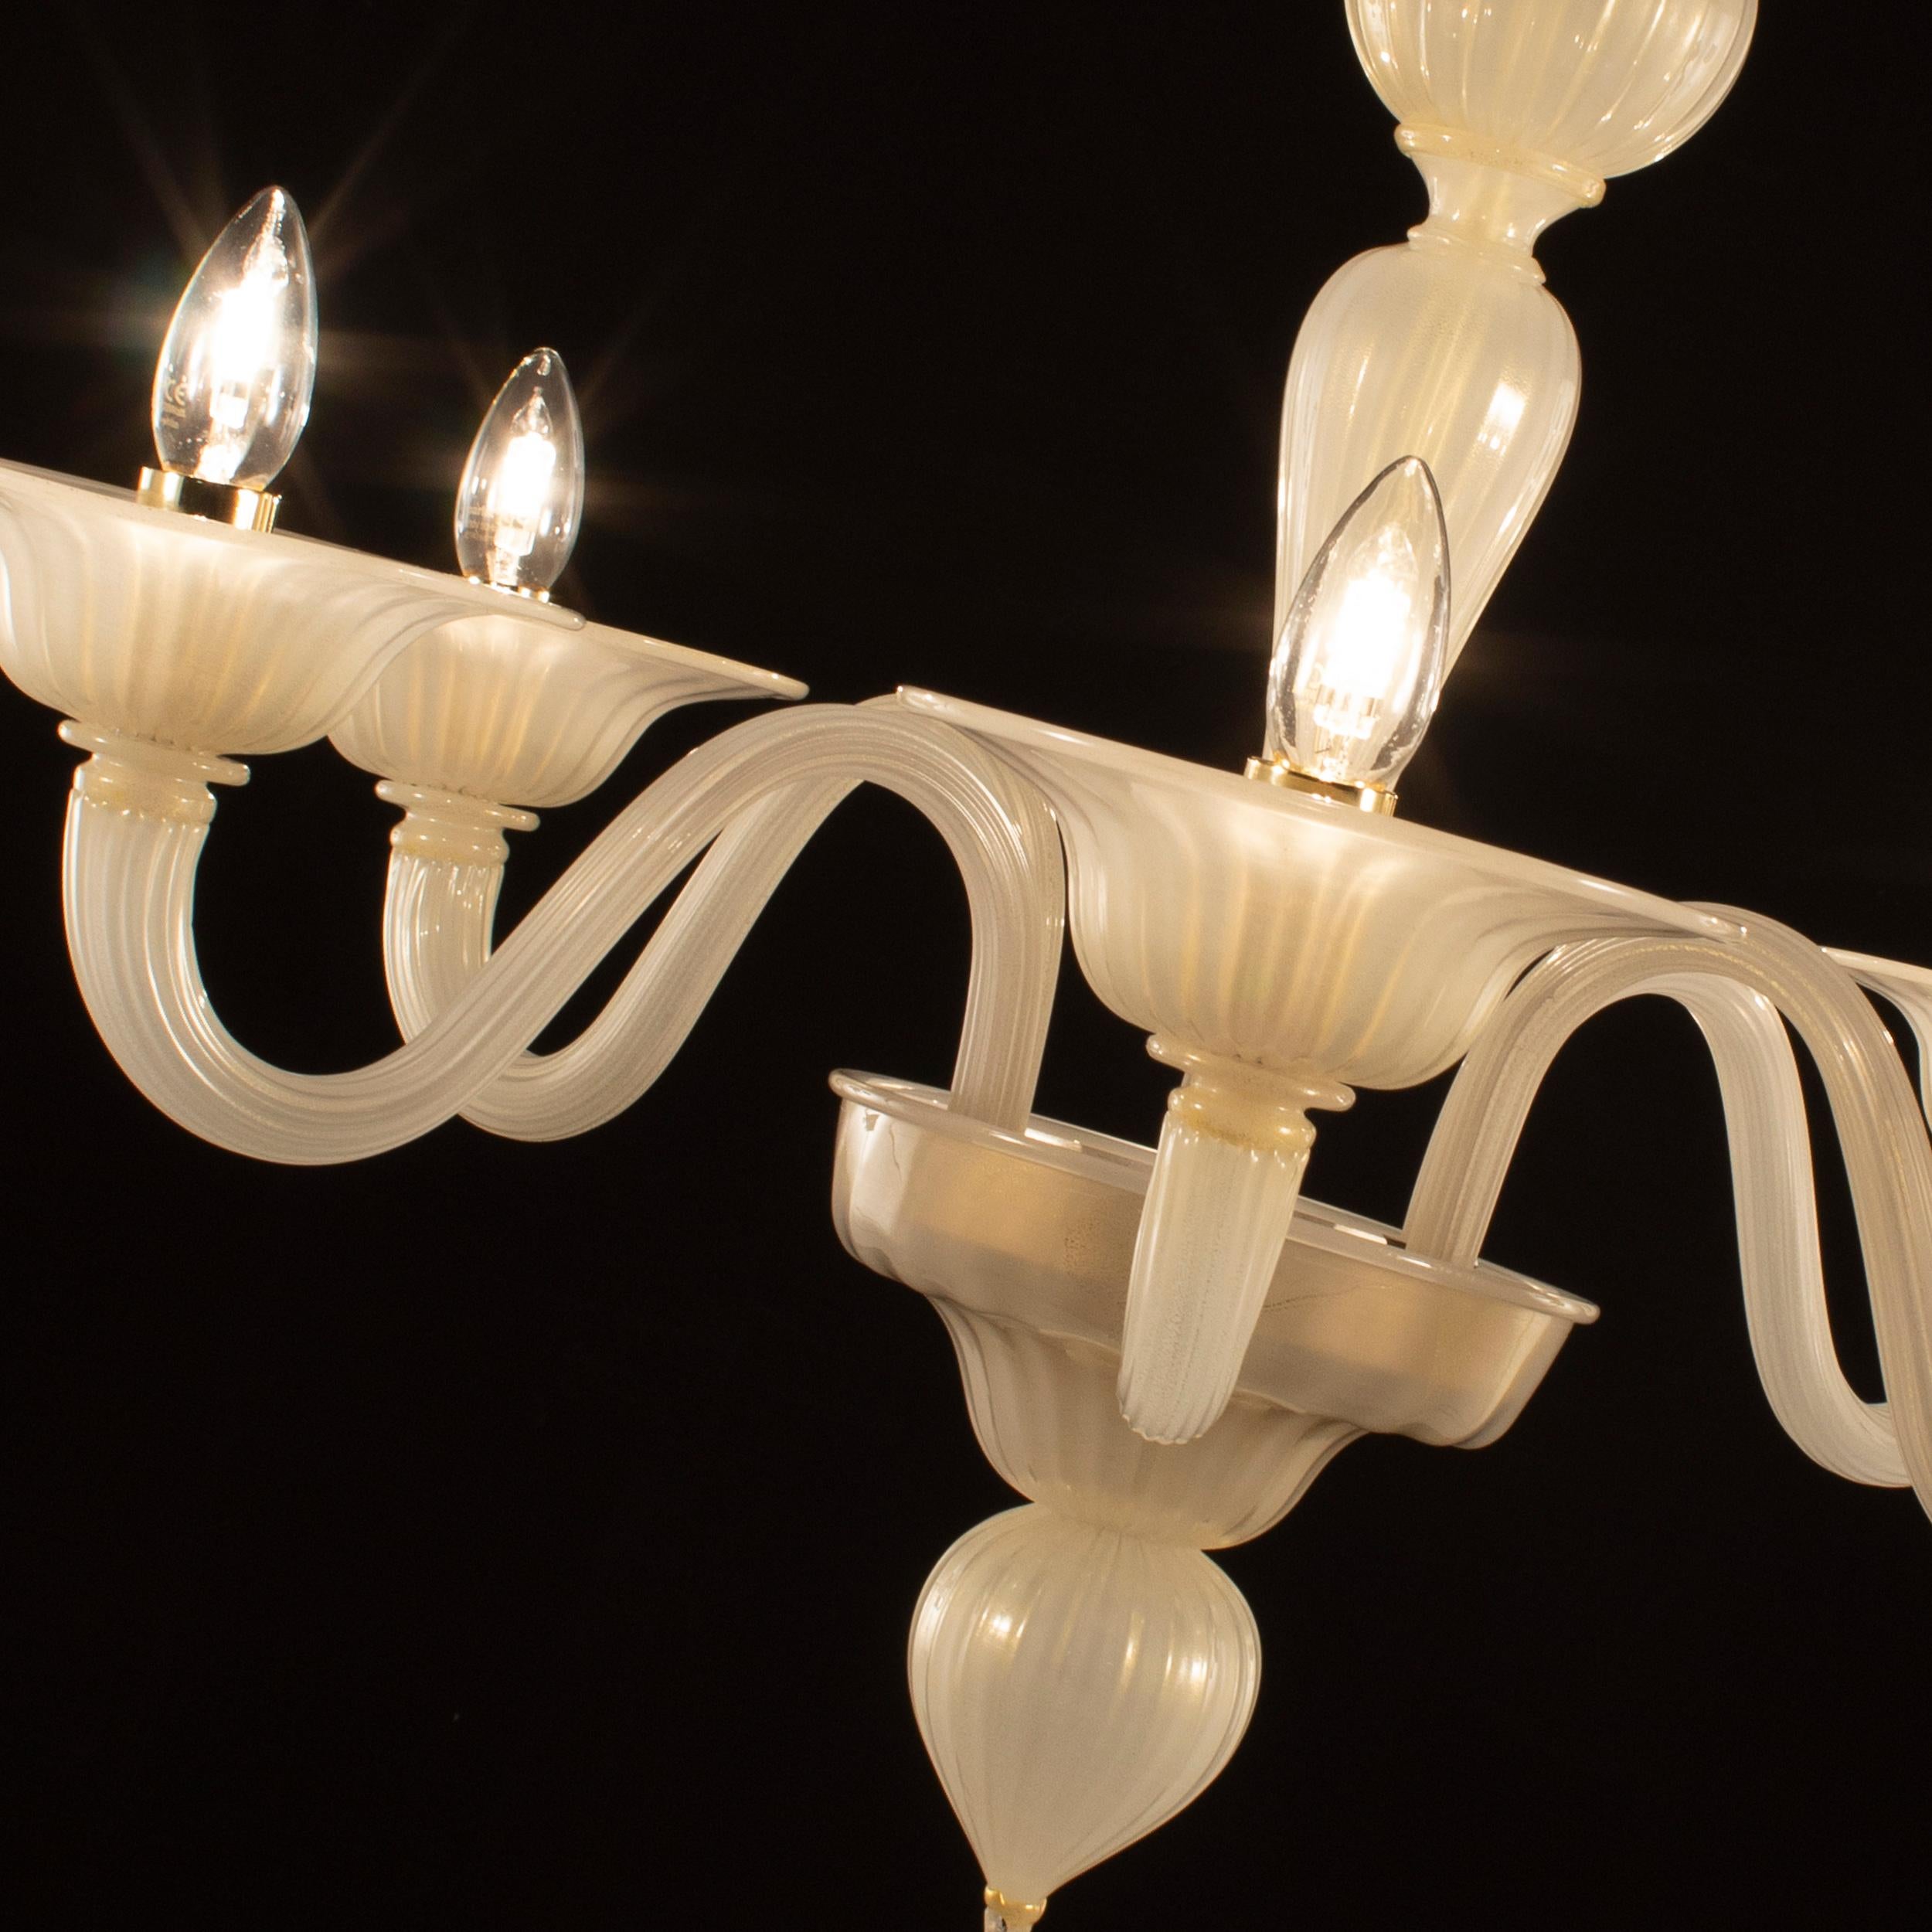 Simplicissimus 360 chandelier, 6 lights, white silk-gold artistic glass by Multiforme
This collection in Murano glass is characterized by superb simplicity. It is the result of a research which harks back to the Classic Murano chandeliers with the